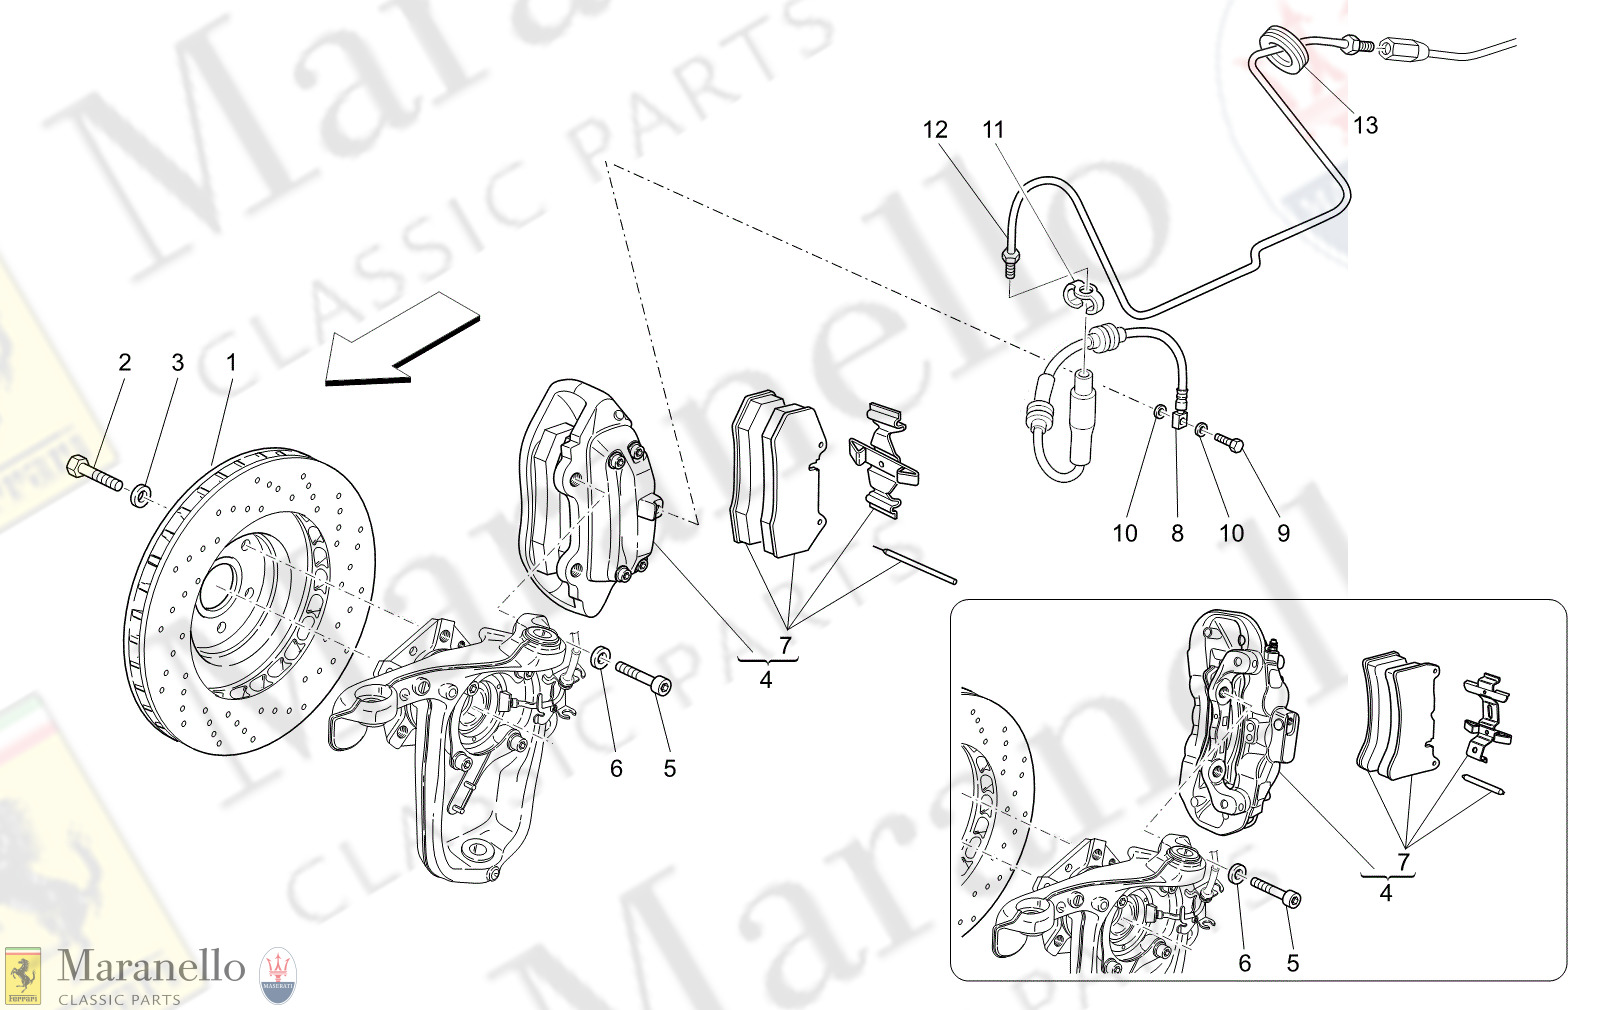 04.10 - 11 - 0410 - 11 Braking Devices On Front Wheels